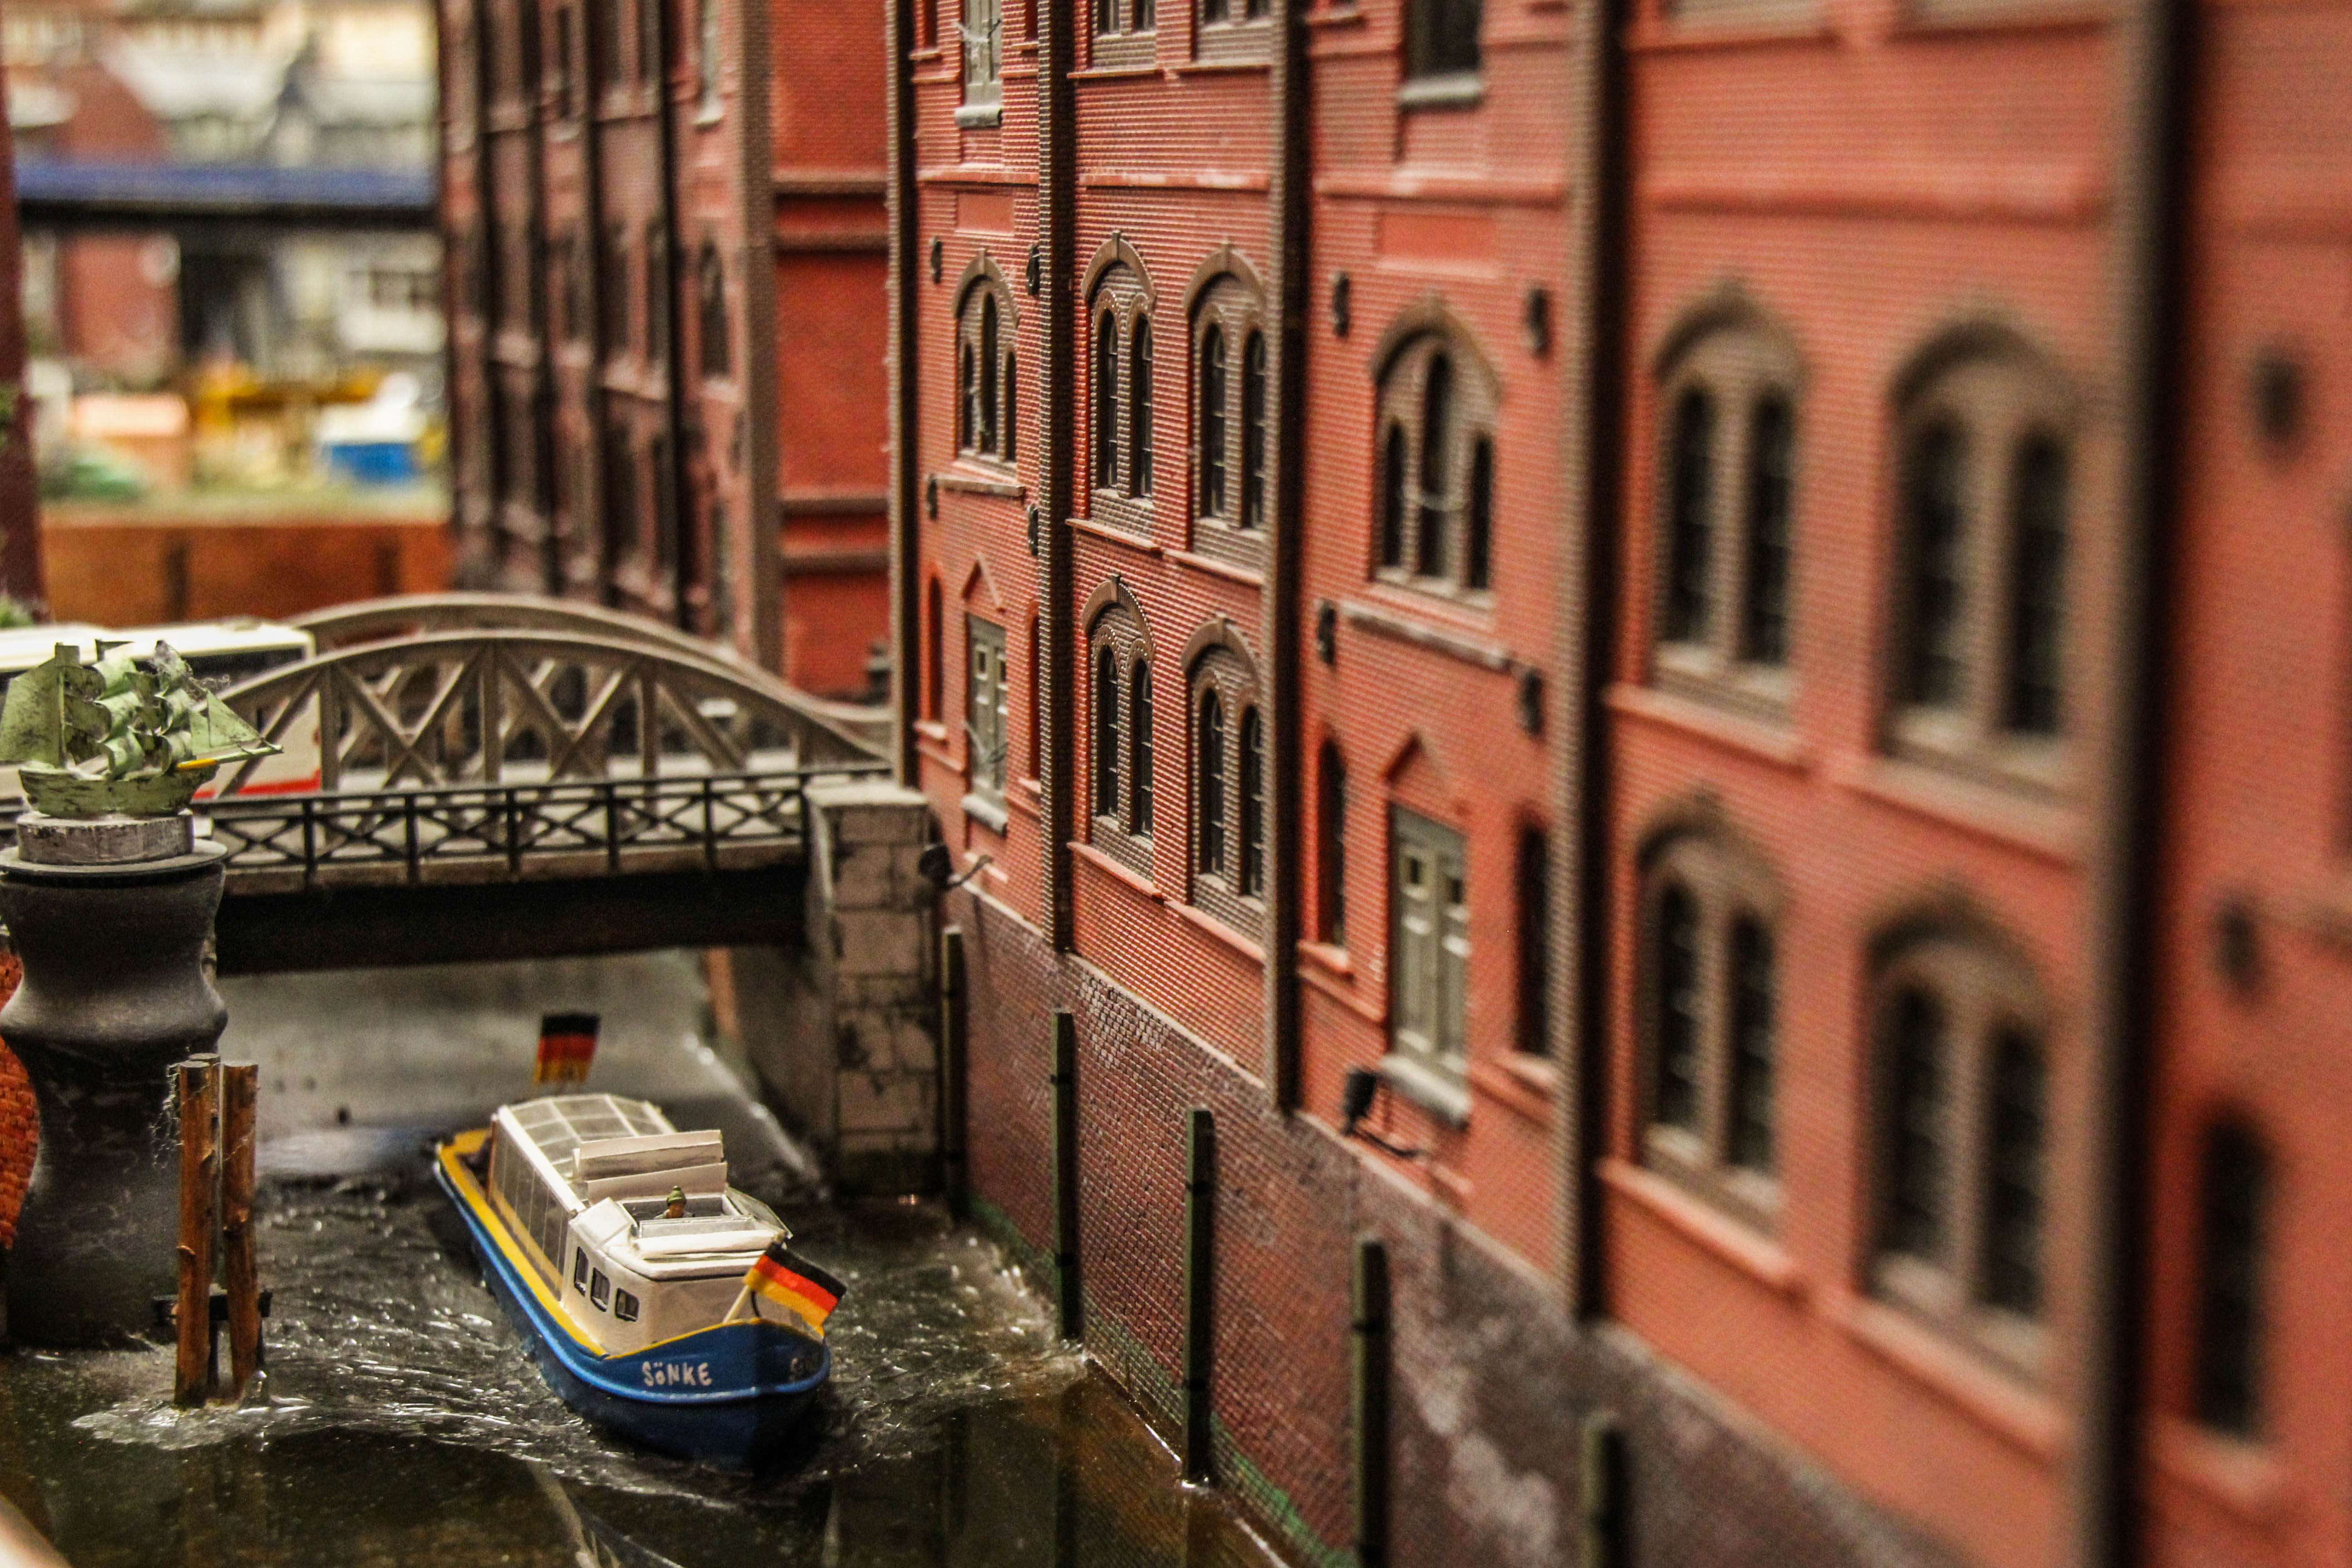 Miniatur Wunderland | Hamburg, Germany Attractions - Lonely Planet